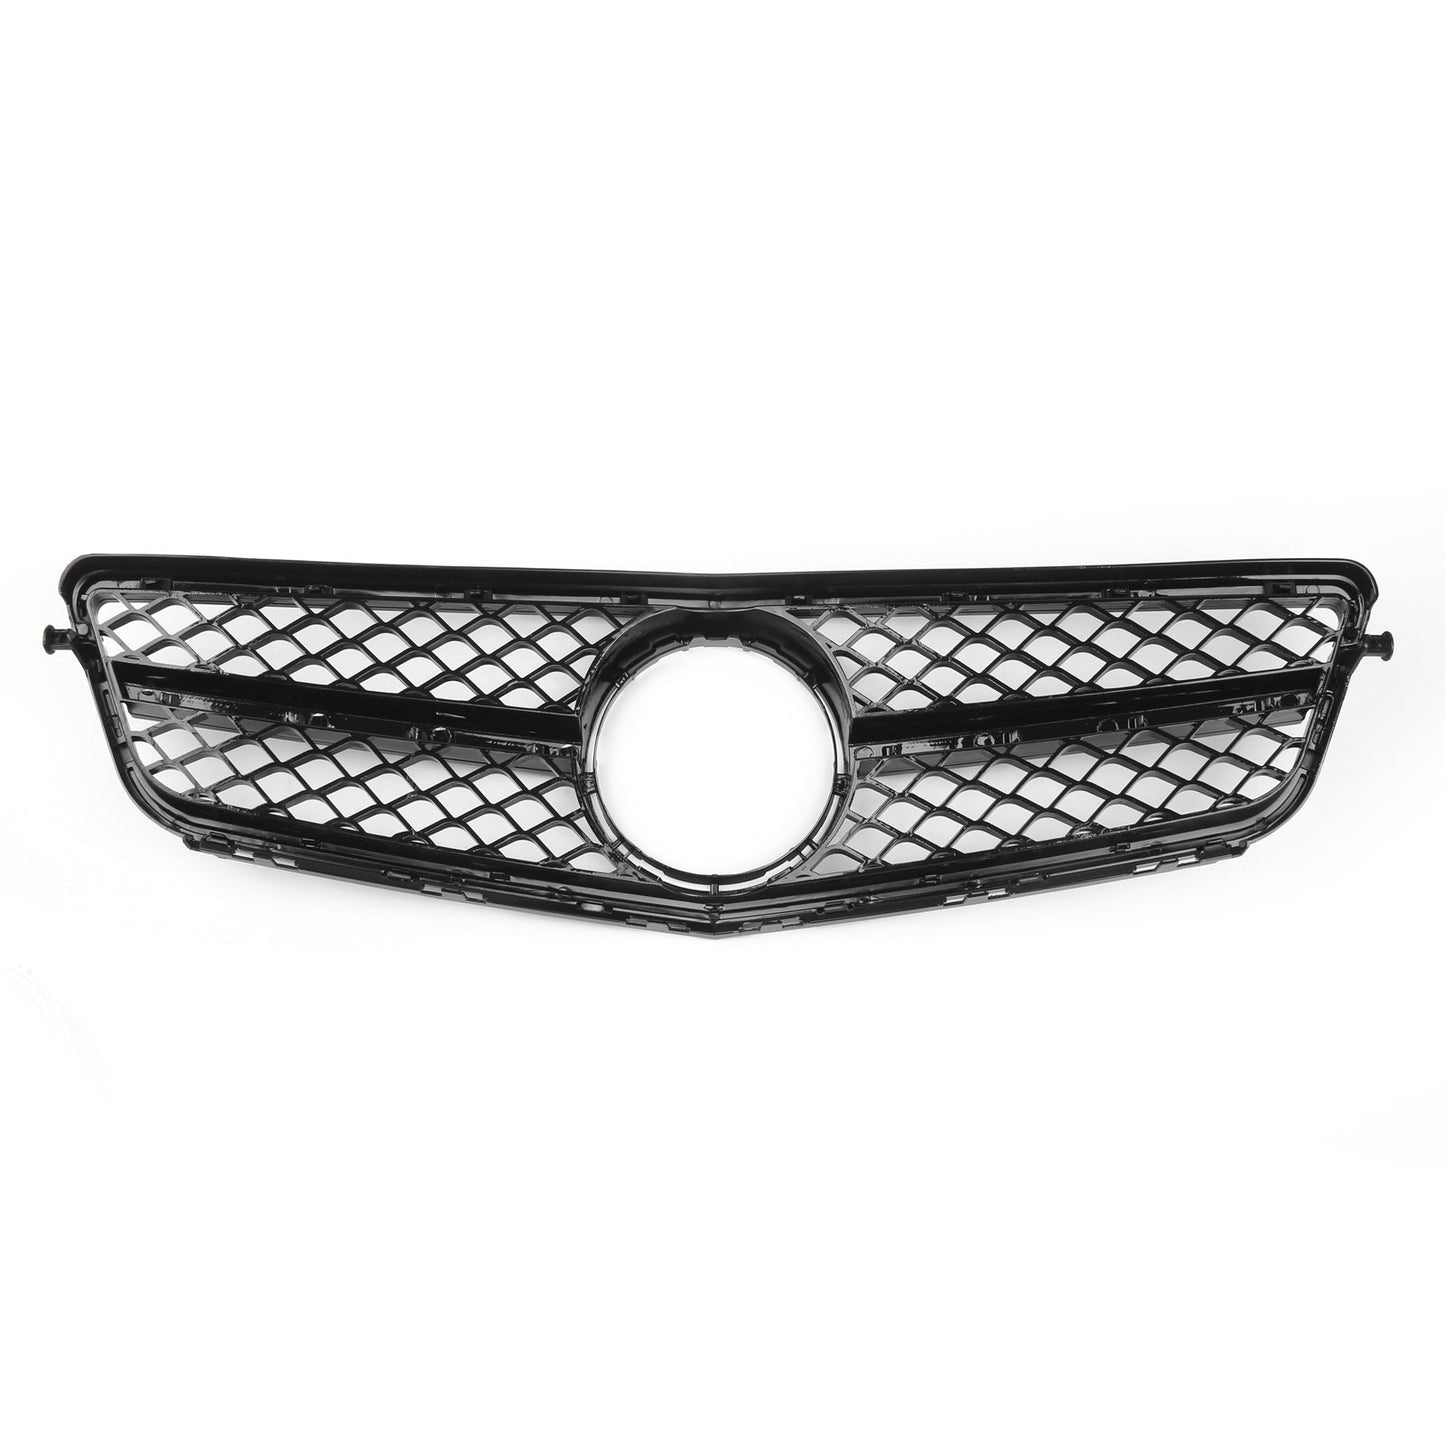 2008-2014 Benz C-Class W204 C300 C350 Car Grille Front Grill Gloss Black C63 Style